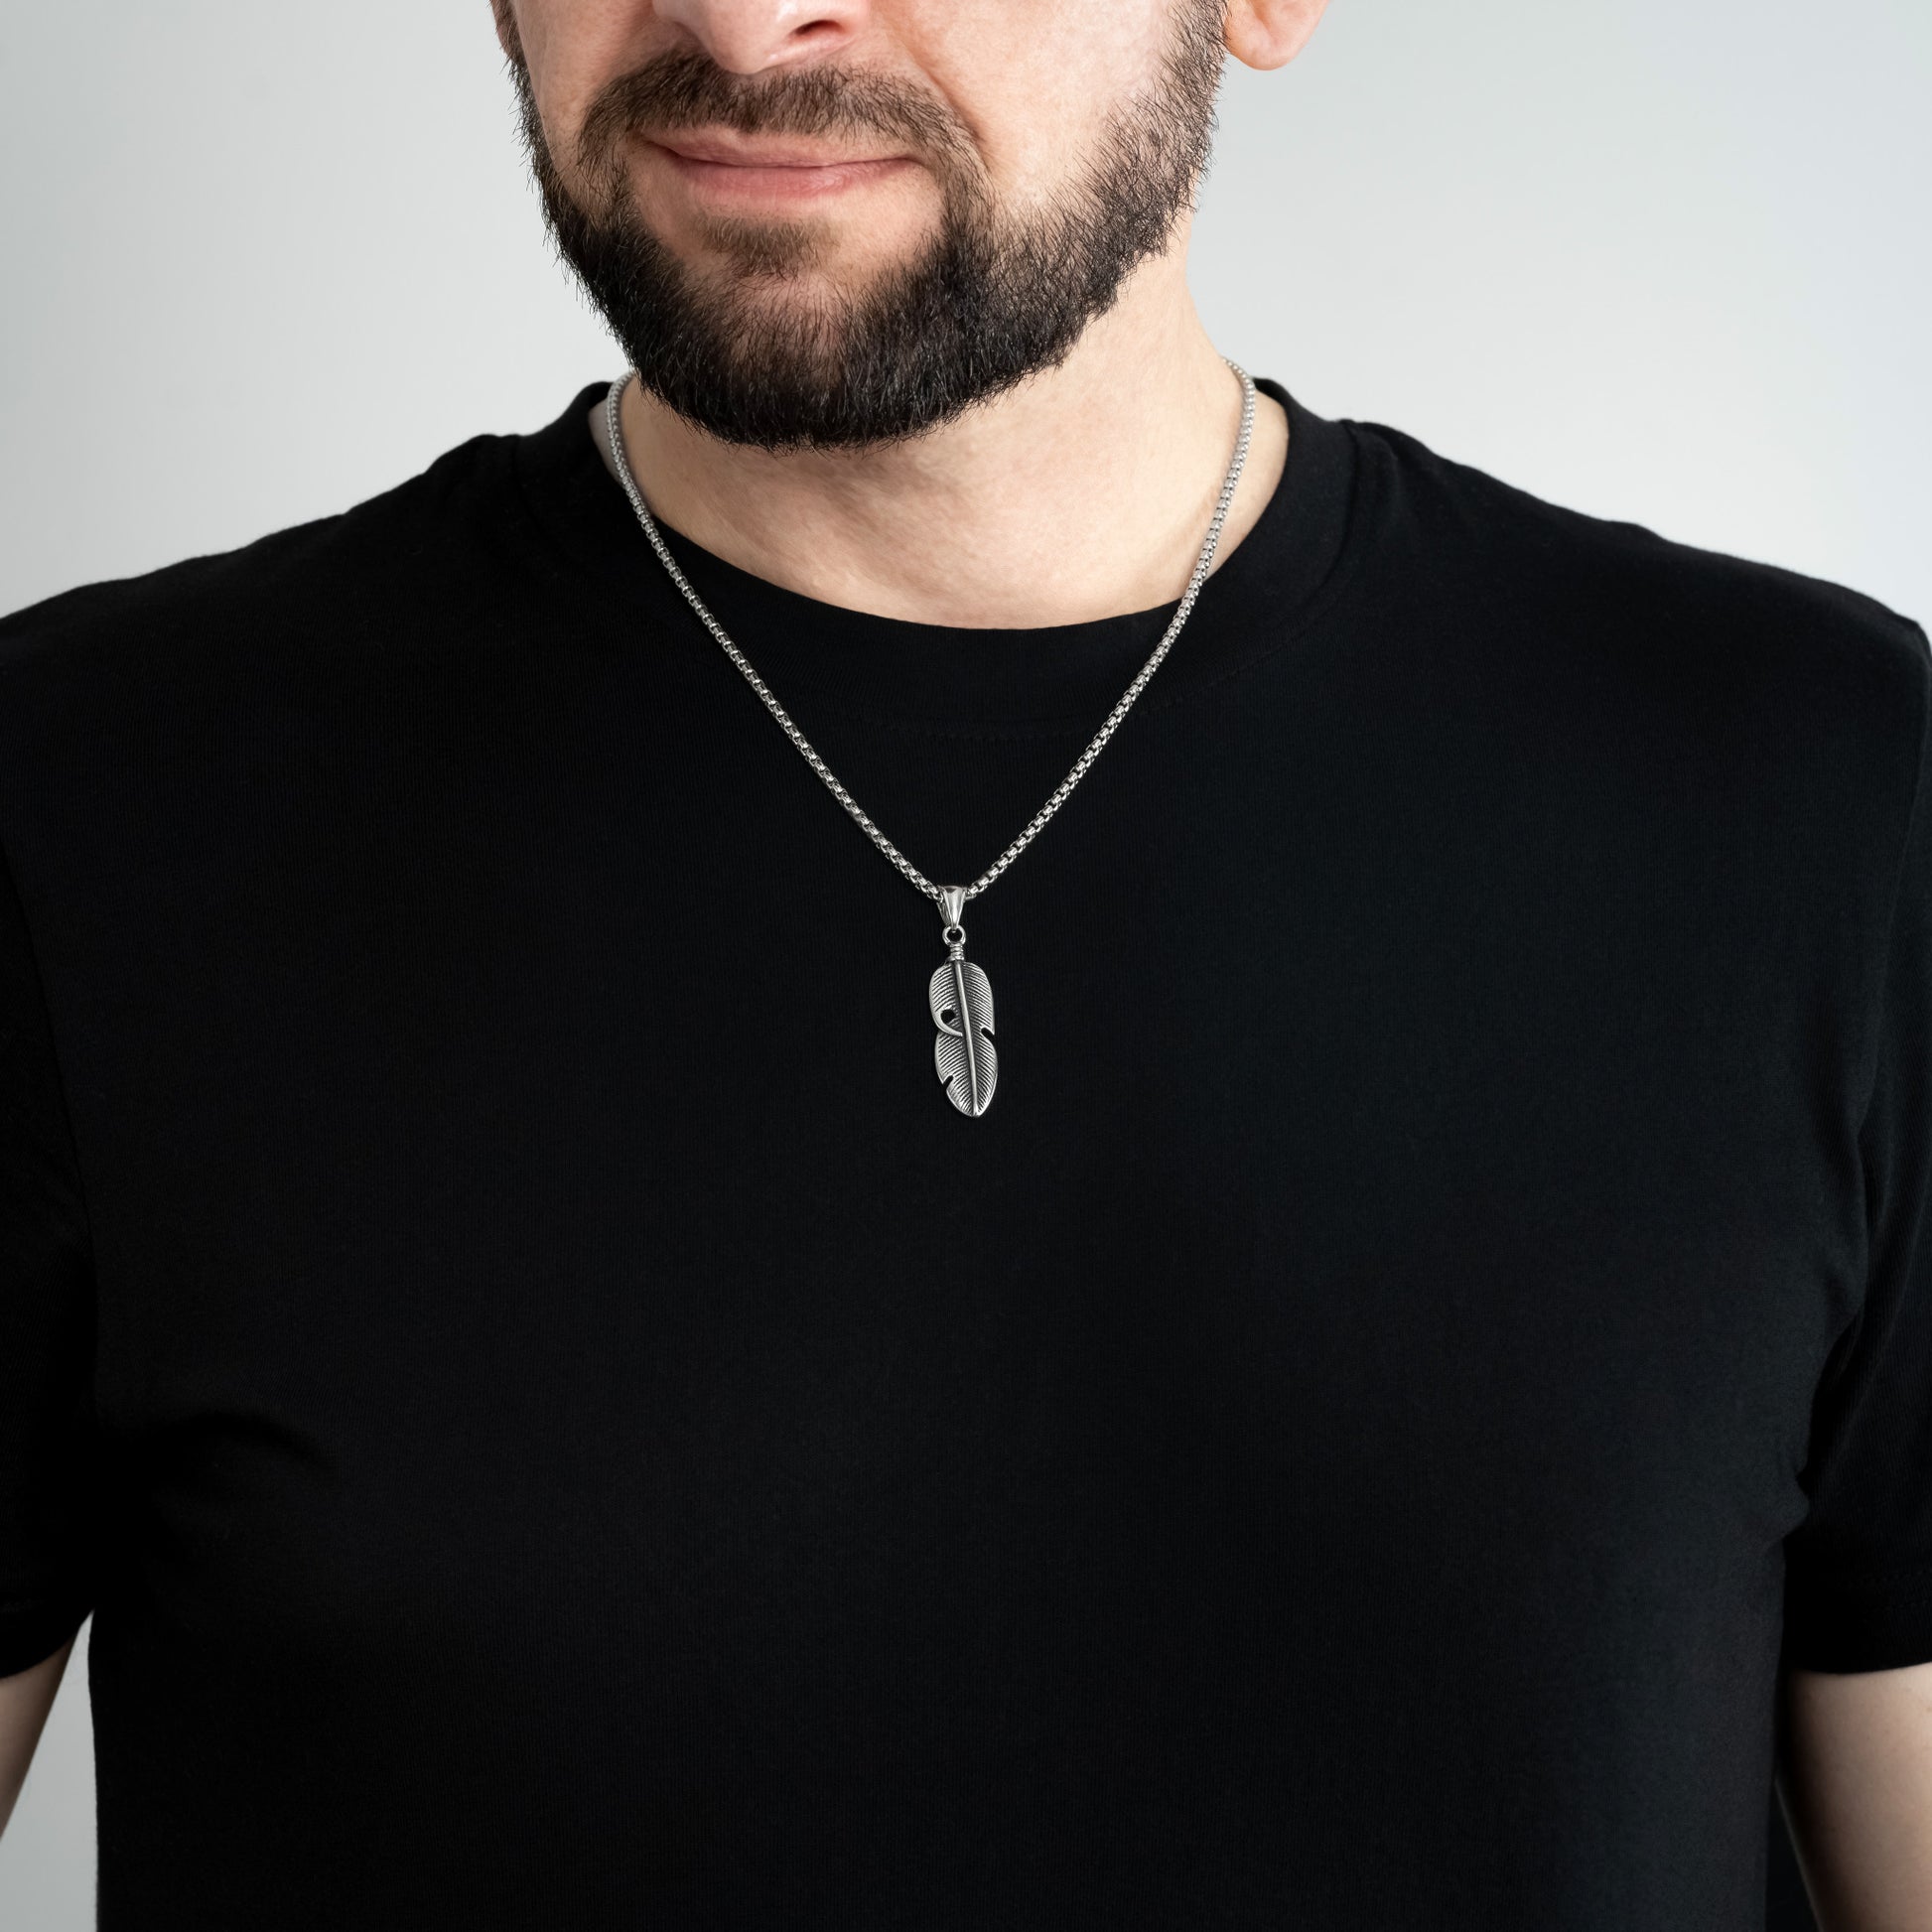 A male model in a black t-shirt wearing a Feather Leaf Silver Pendant with a 3mm Silver Box link chain 22 inches.